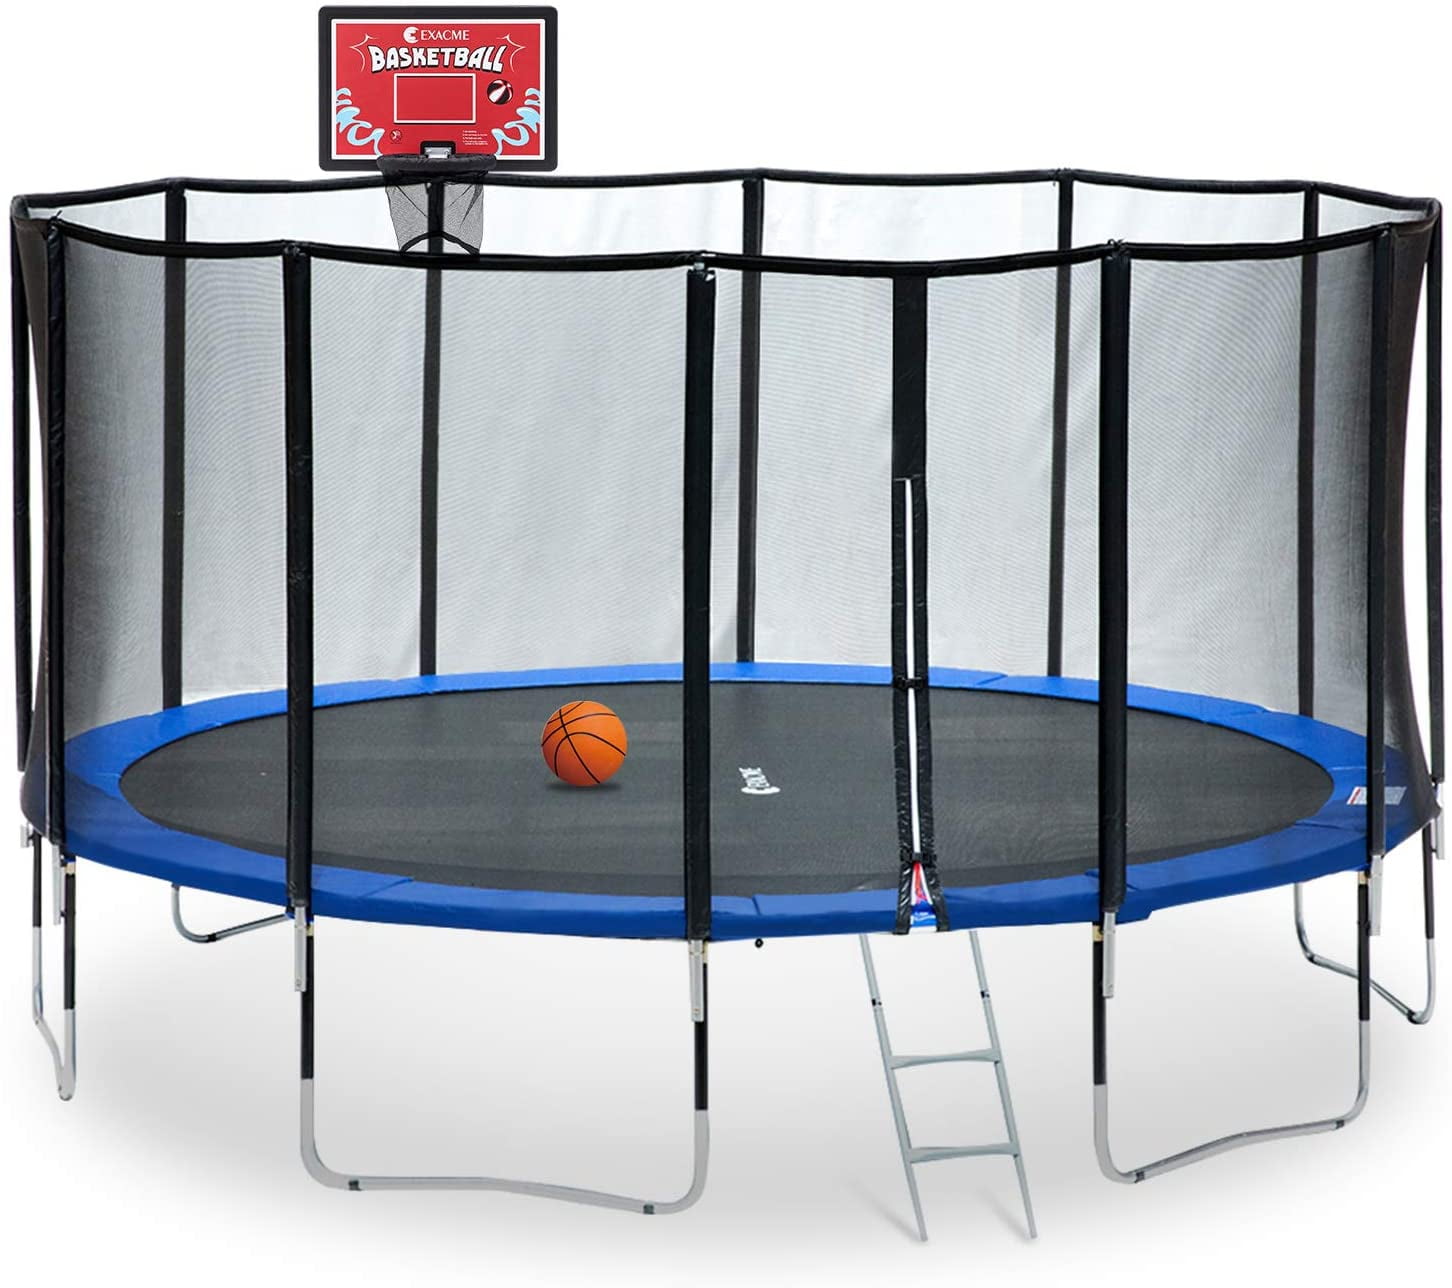 Exacme 15 Foot Outdoor Round Trampoline 400 LBS Weight Limit with Rectangular Basketball Hoop, Red, L15+BH07RD